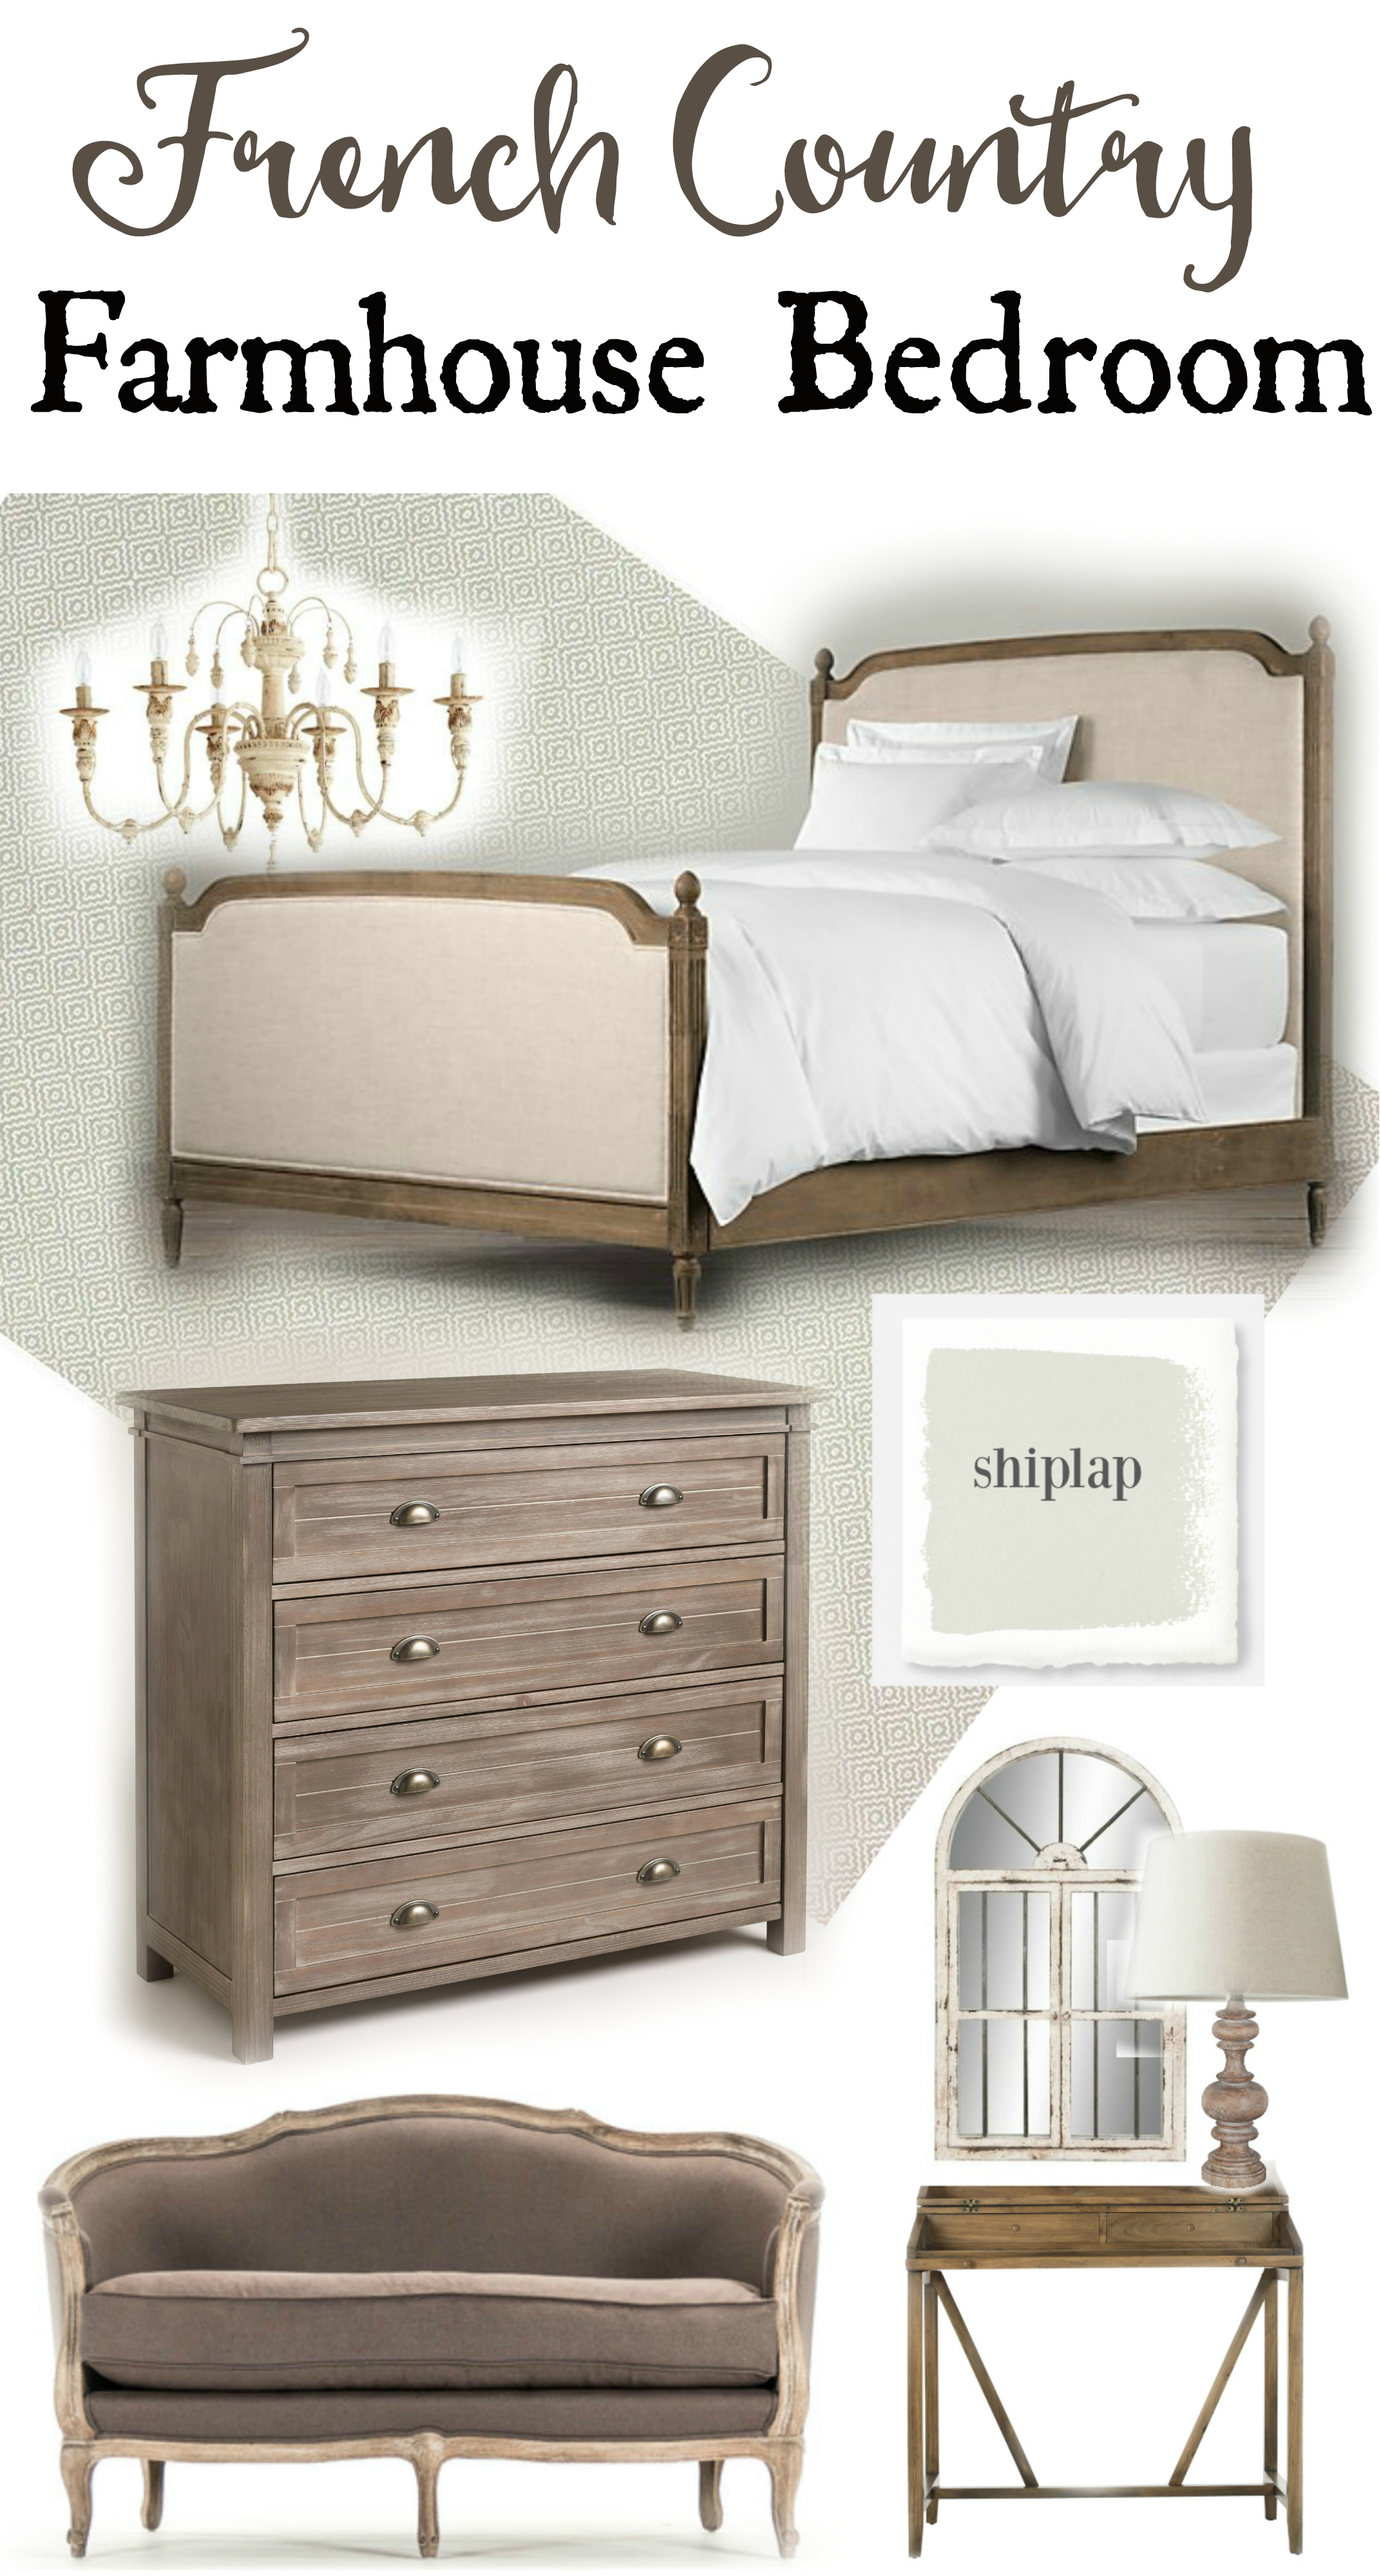 Create a romantic bedroom with this french country farmhouse bedroom decor. Go to theweatheredfox.com to buy farmhouse bedroom products and decor!